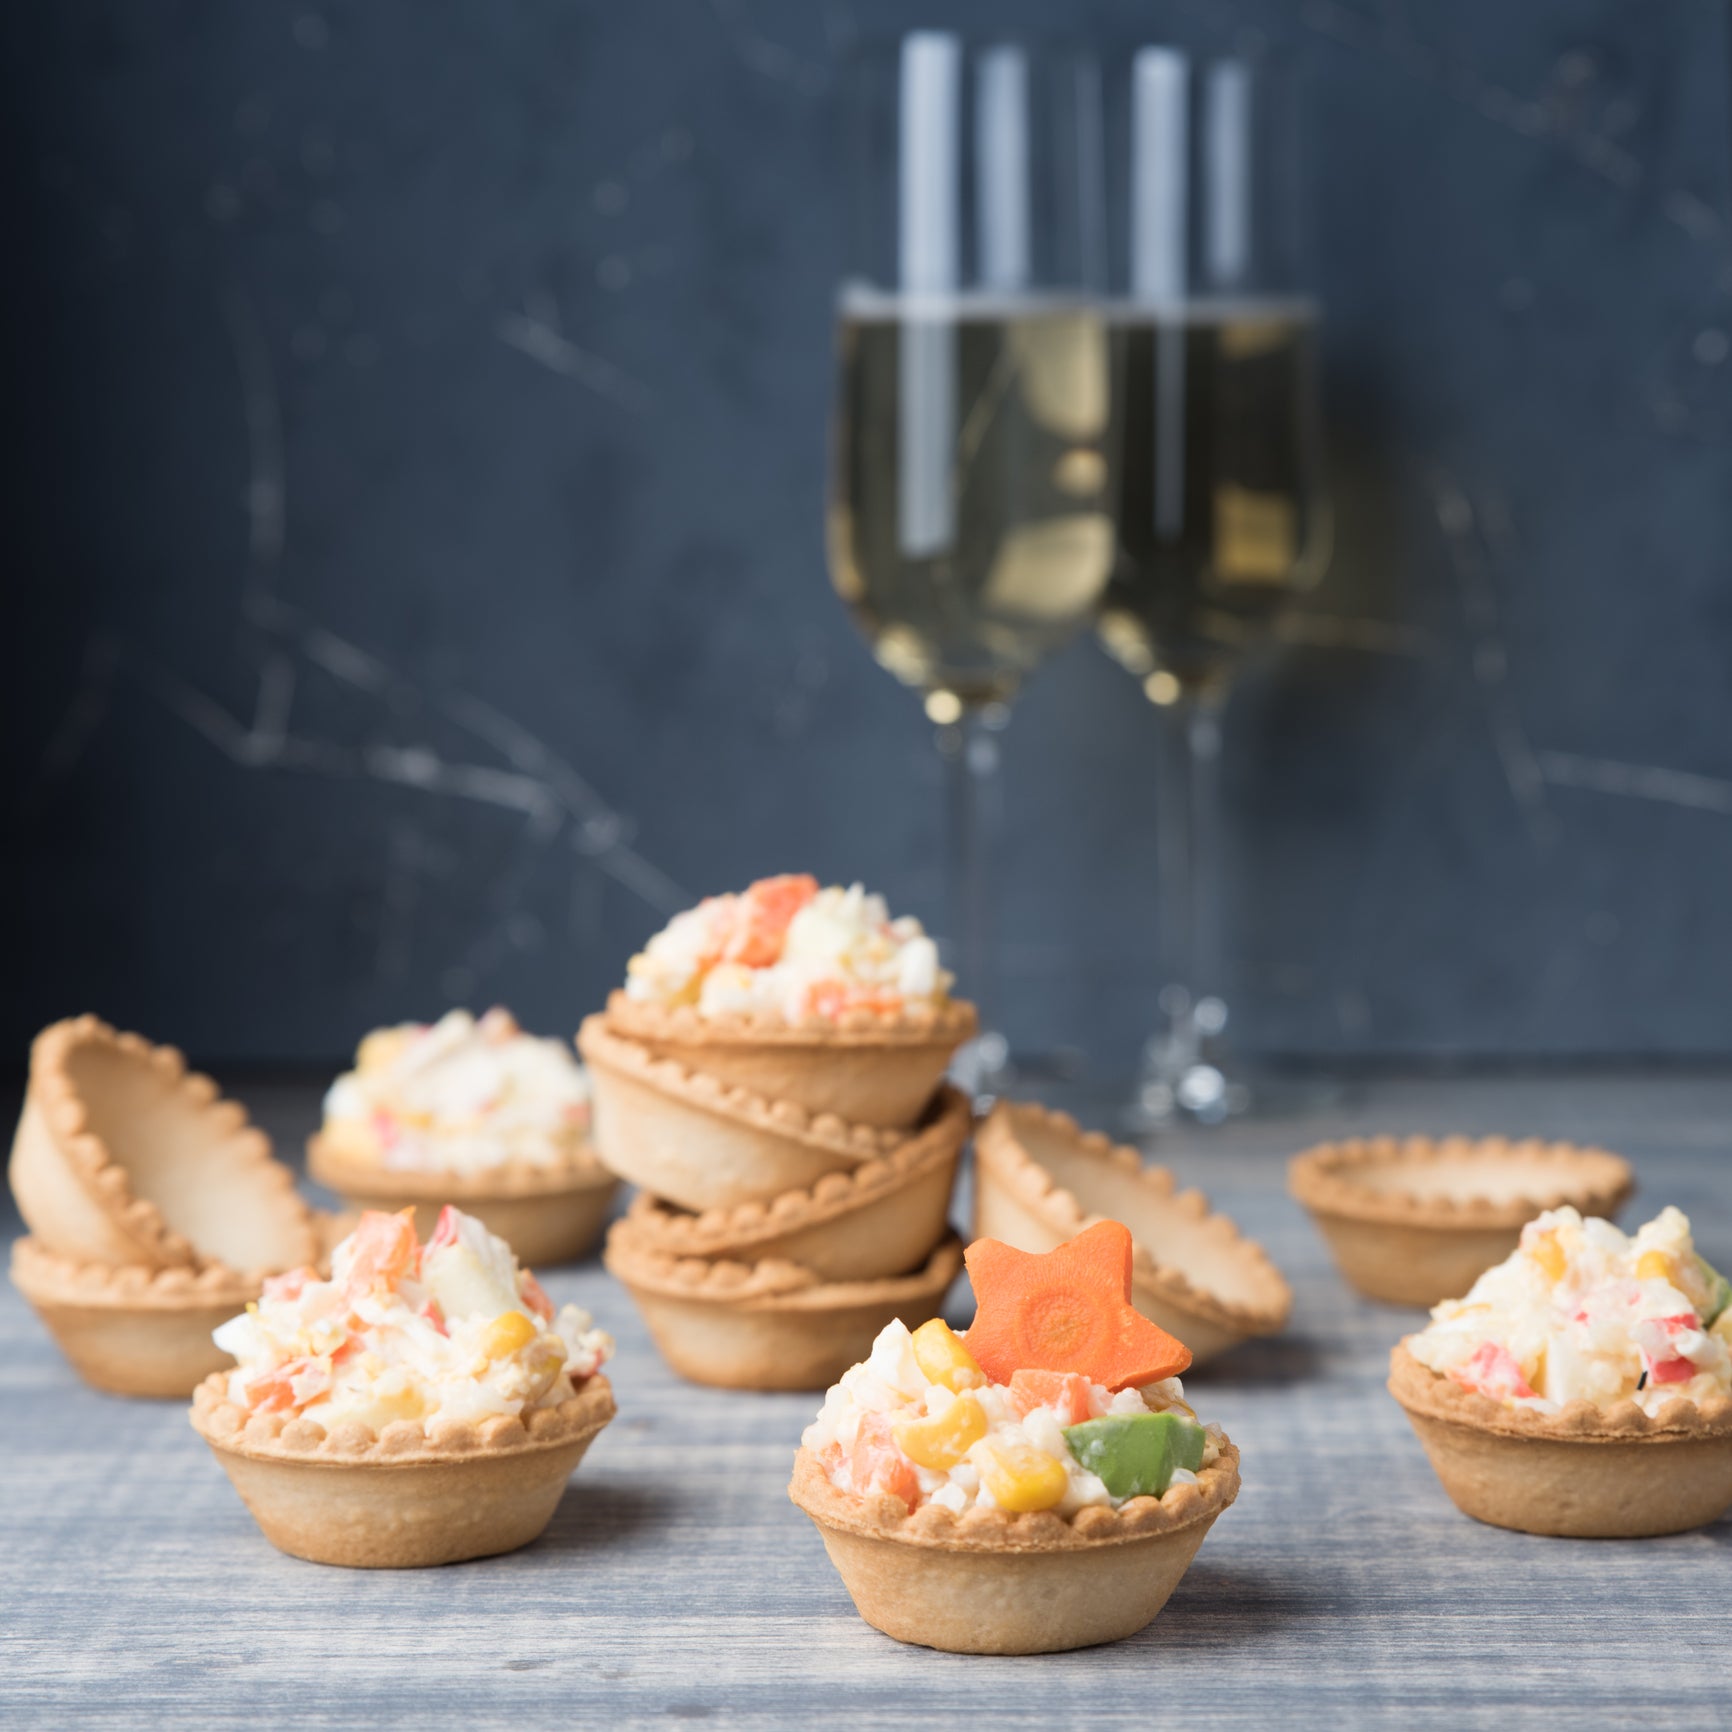 Expertly paired wine glasses next to a sumptuous crab dish, highlighting the perfect match of Chardonnay with crab cakes, Sauvignon Blanc with delicate crab meat, Pinot Grigio with crab legs, and Rosé with a crab dip for a gourmet seafood experience